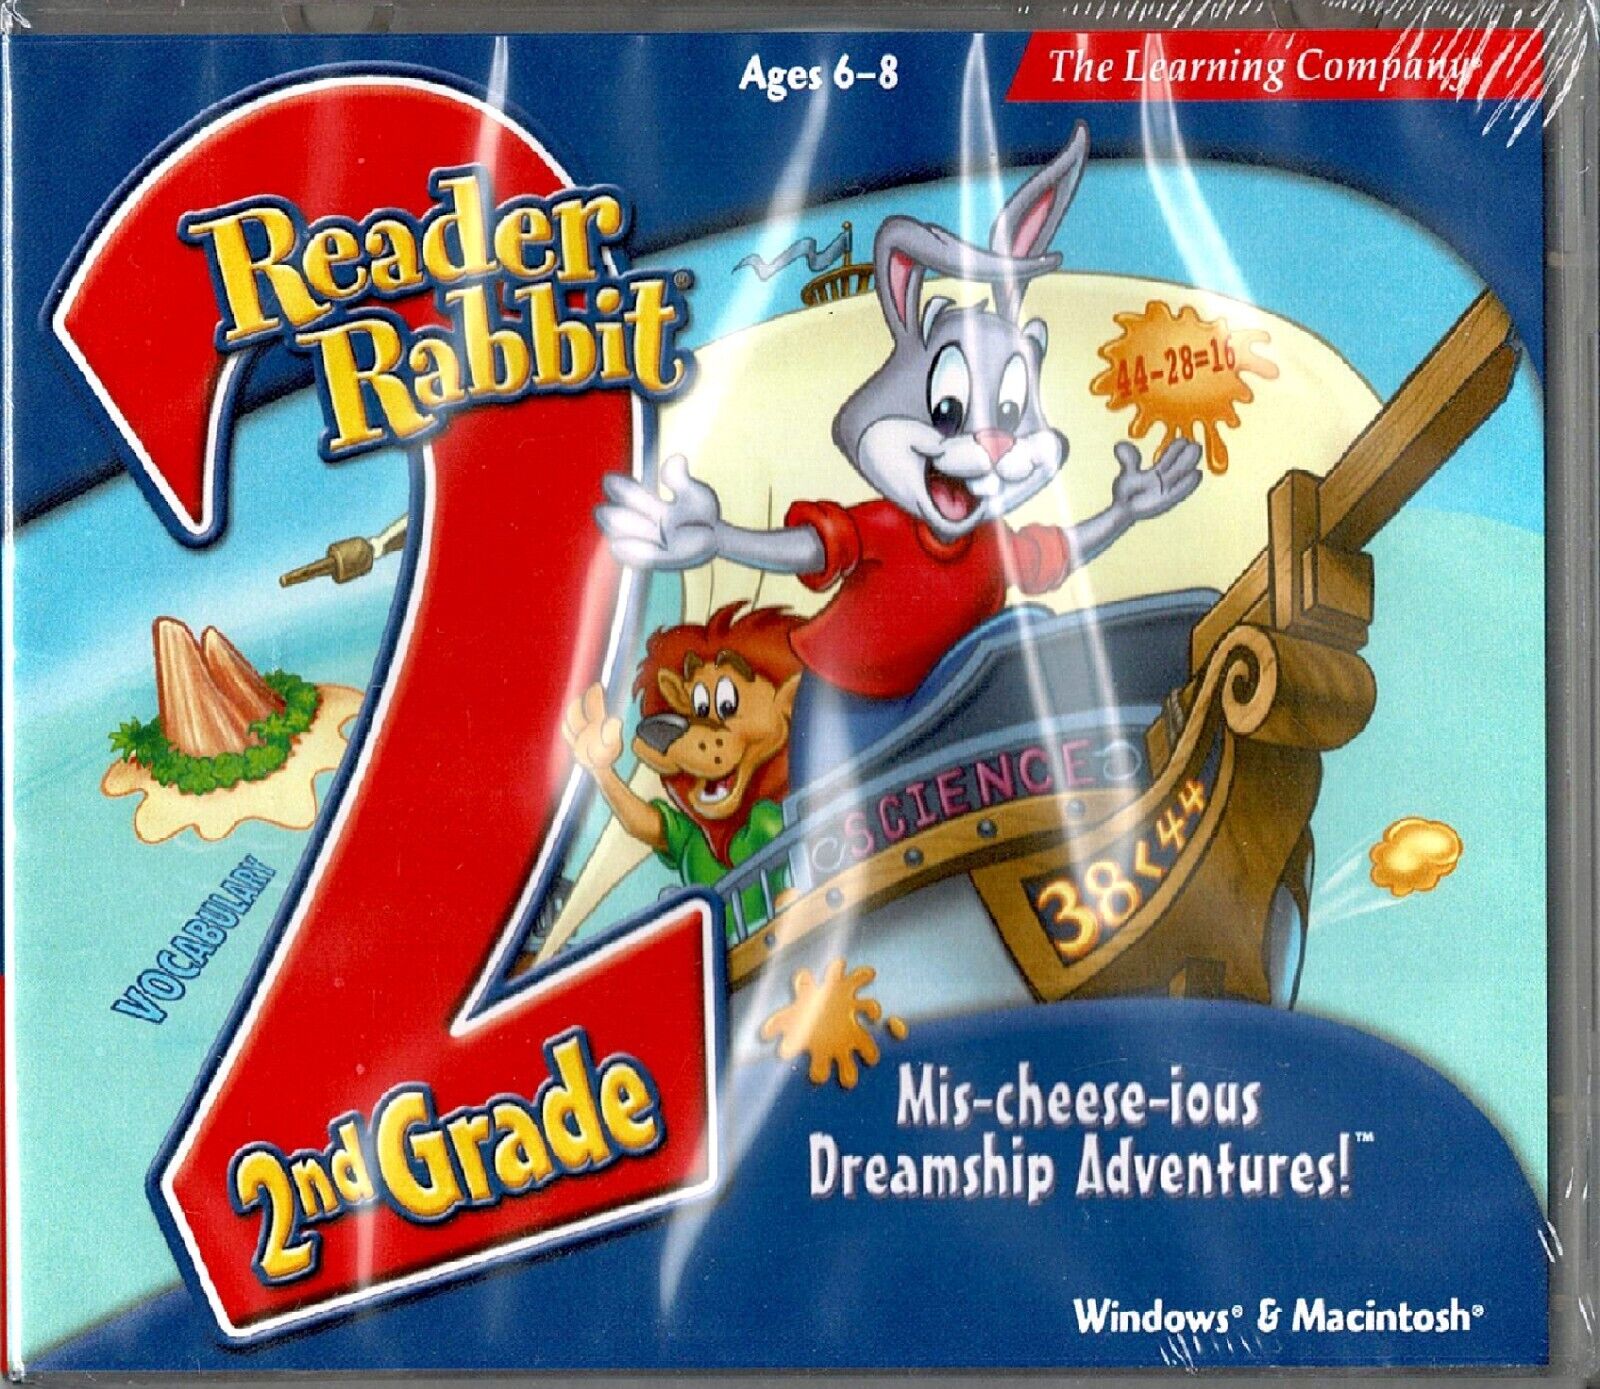 Reader Rabbit 2nd Grade Mis-Cheese-Ious Dreamship Adventures Pc New Win10 8 7 XP